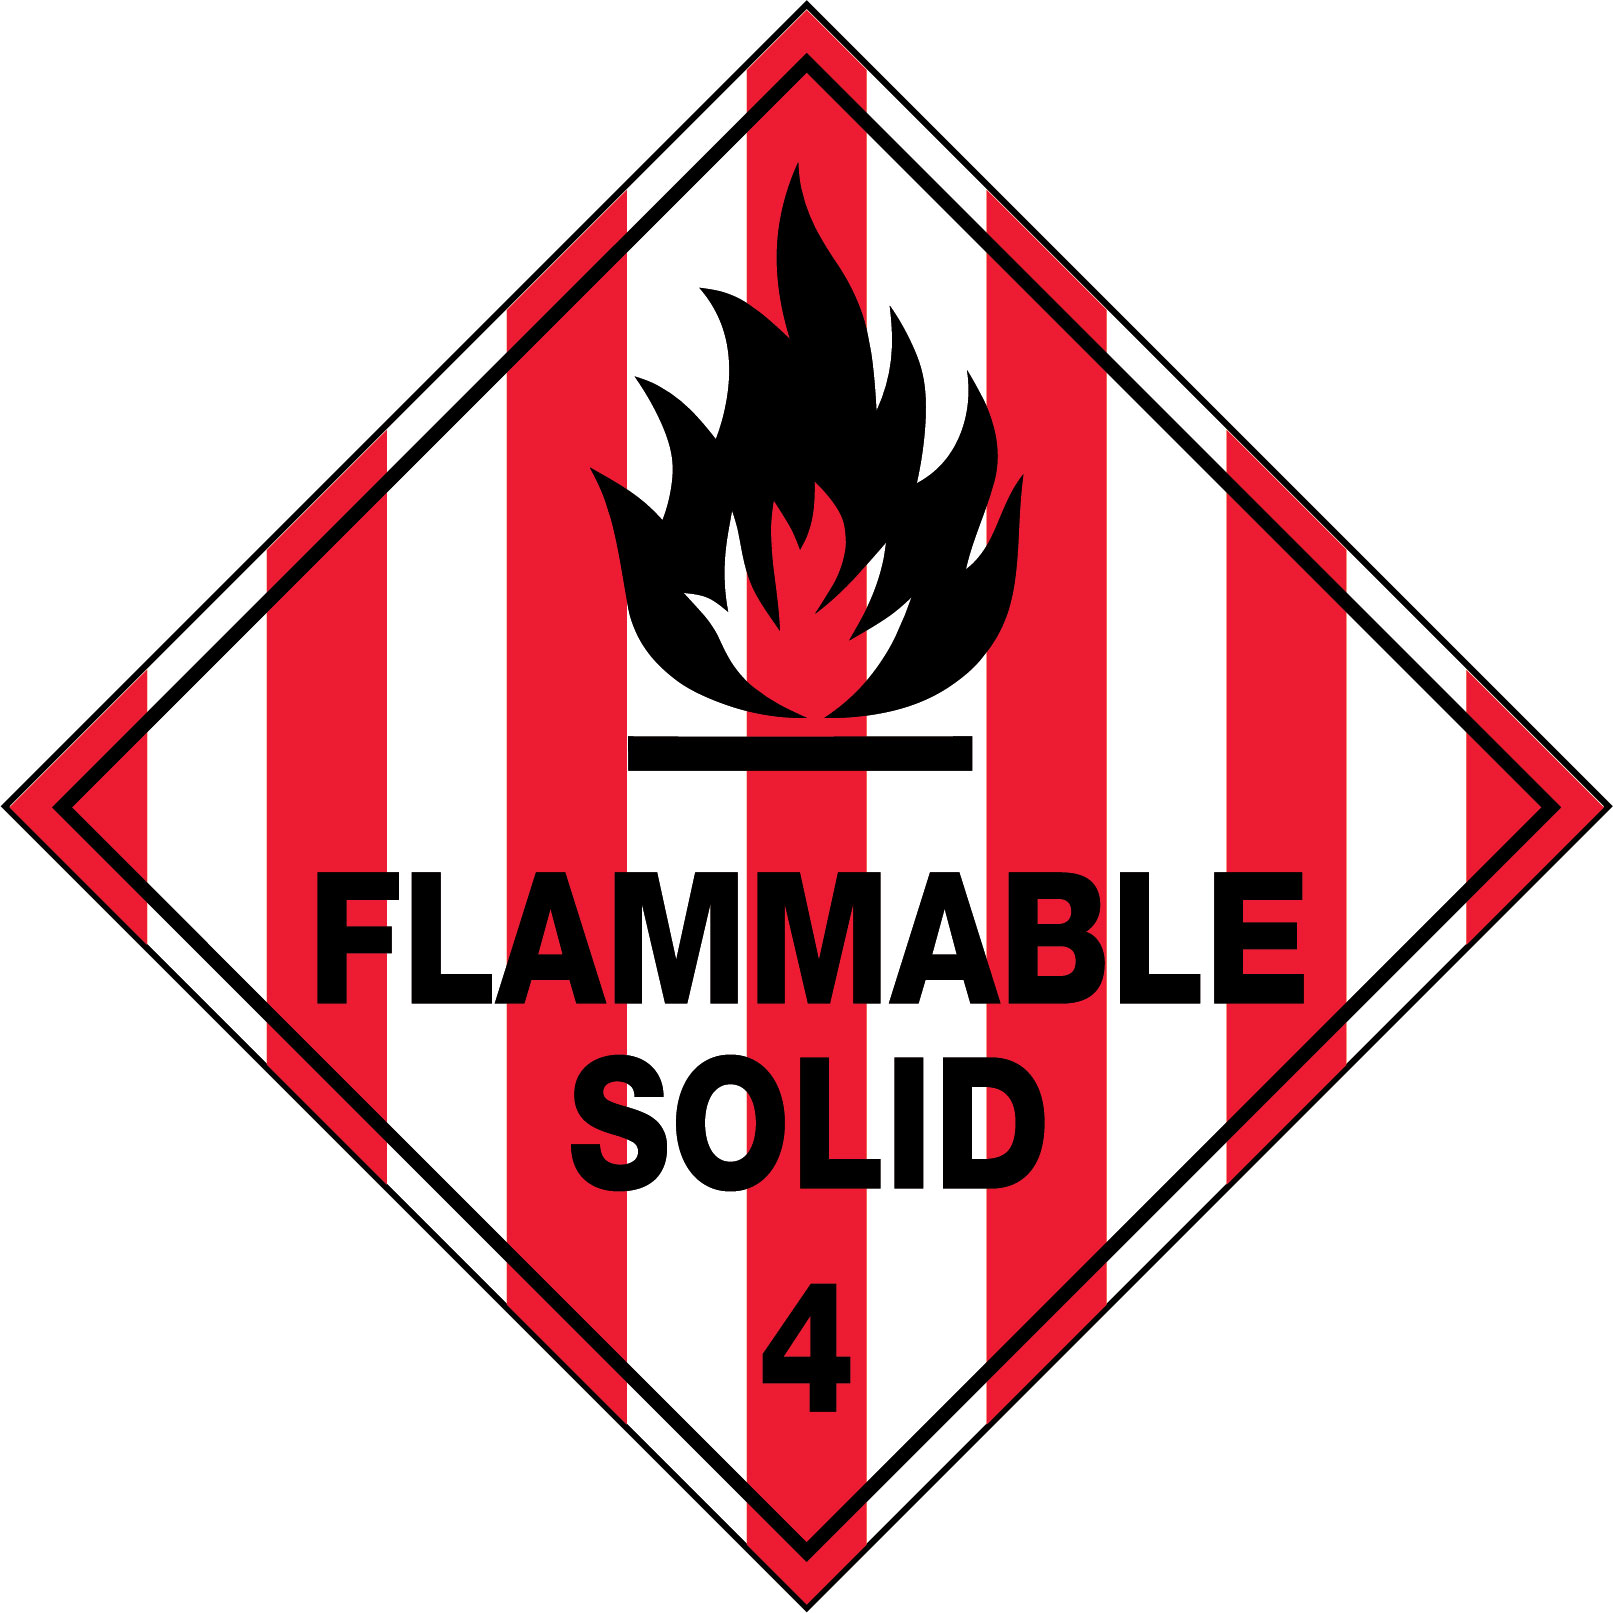 UNIFORM SAFETY 100X100MM SELF ADH 250/RL FLAMMABLE SOLID 4 